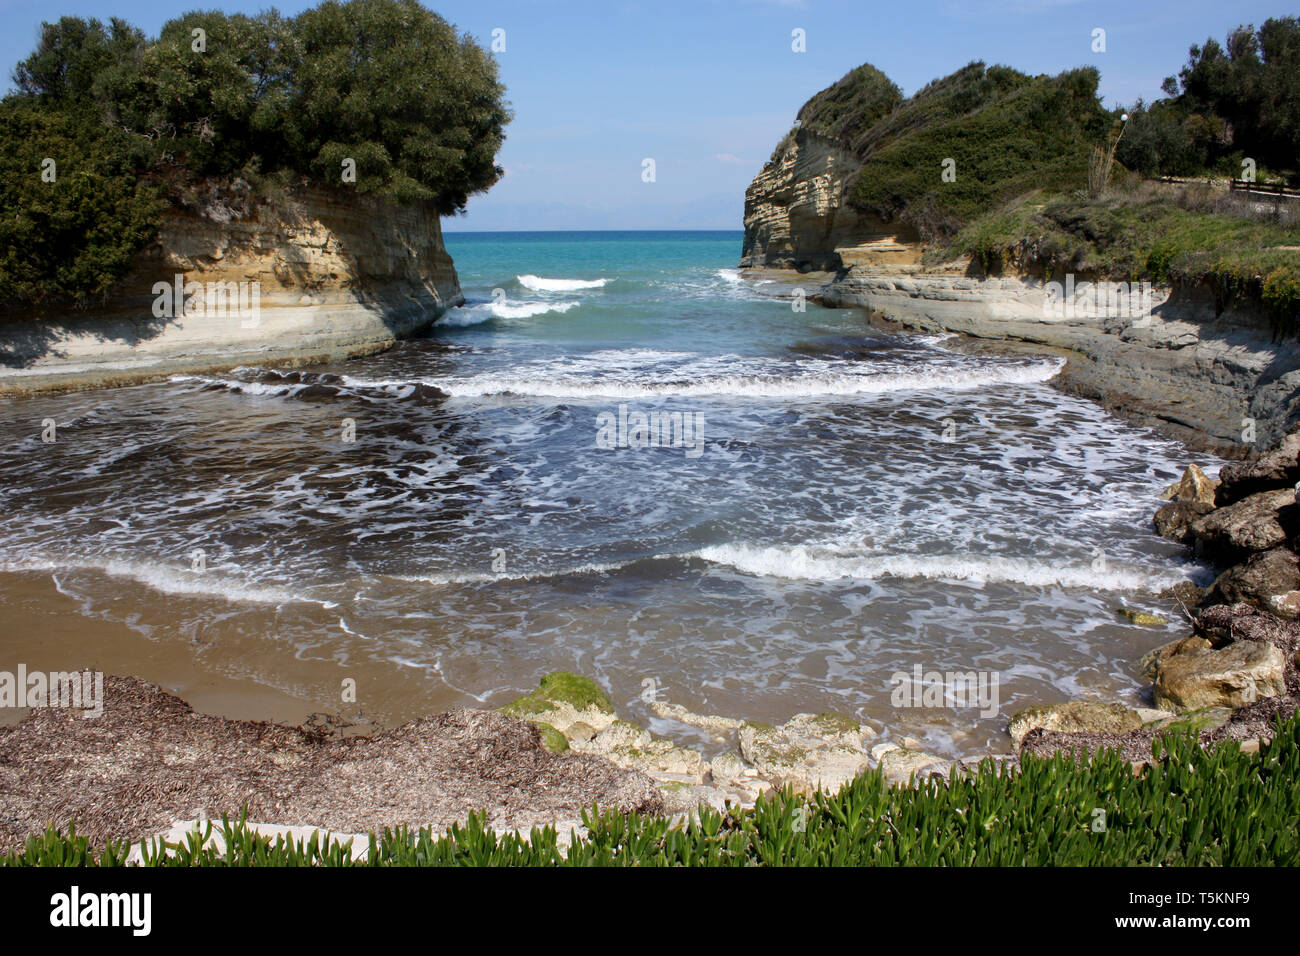 A small seaside bay at Sidari on the north coast of Corfu, one of the Ionian islands of Greece. Stock Photo